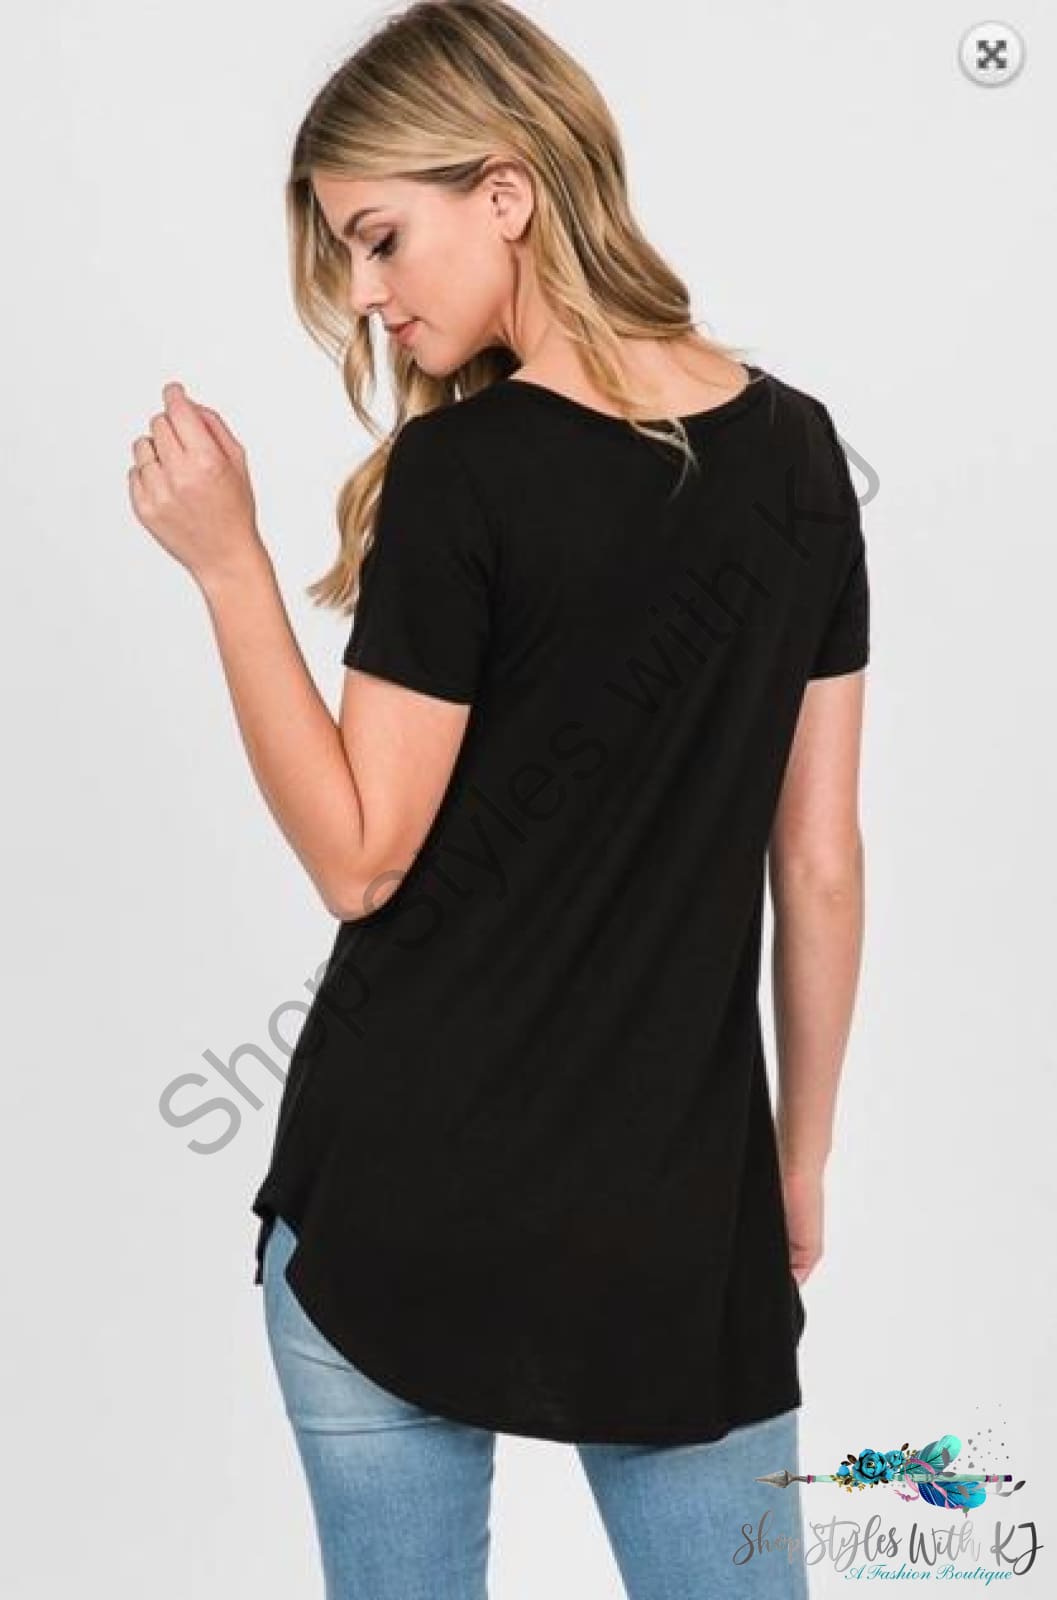 Ultra Essential Black Criss Cross Top - Size Small